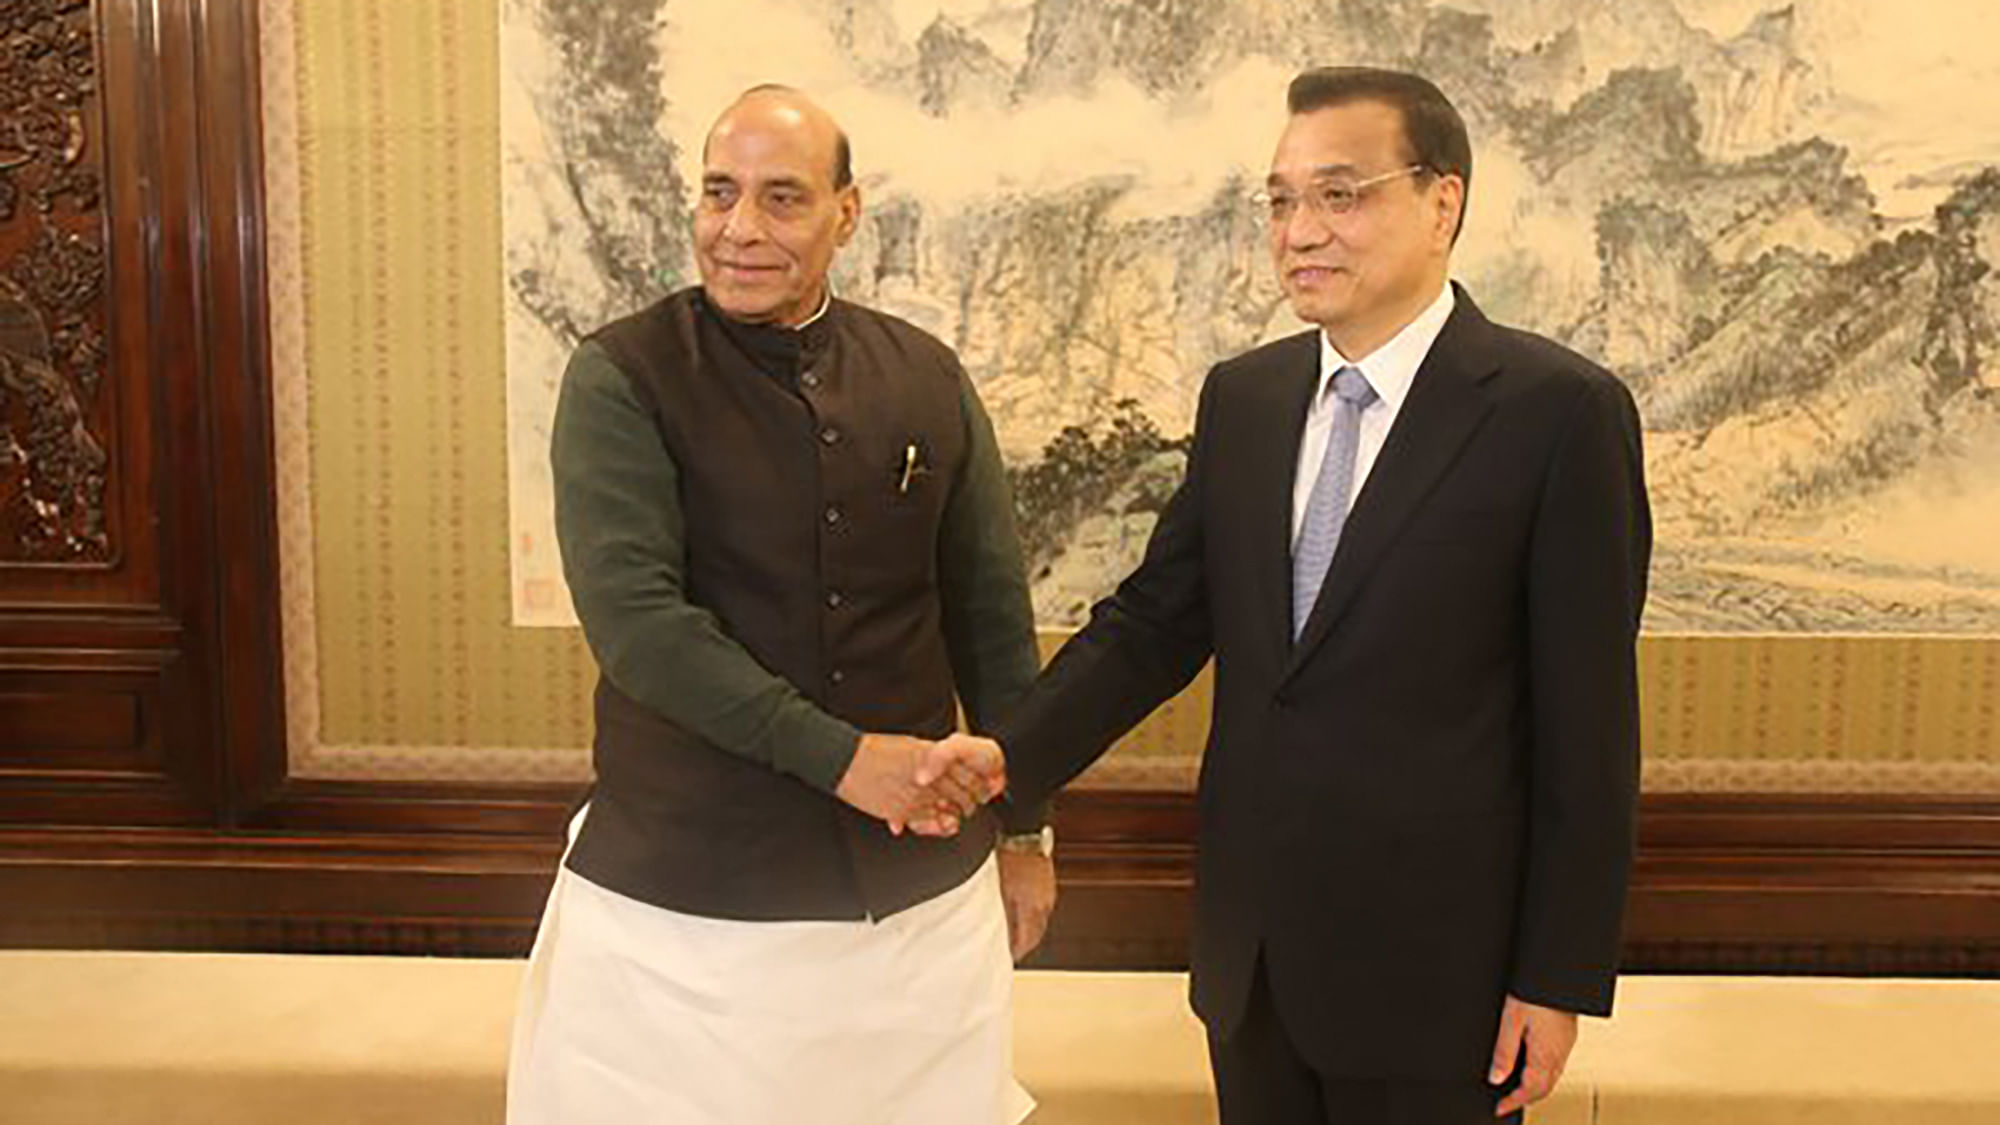 India’s Home Minister Rajnath Singh with Chinese Premier Li Keqiang in Beijing. (Photo: <a href="https://twitter.com/BJPRajnathSingh/status/667382356865515520">Twitter</a>)